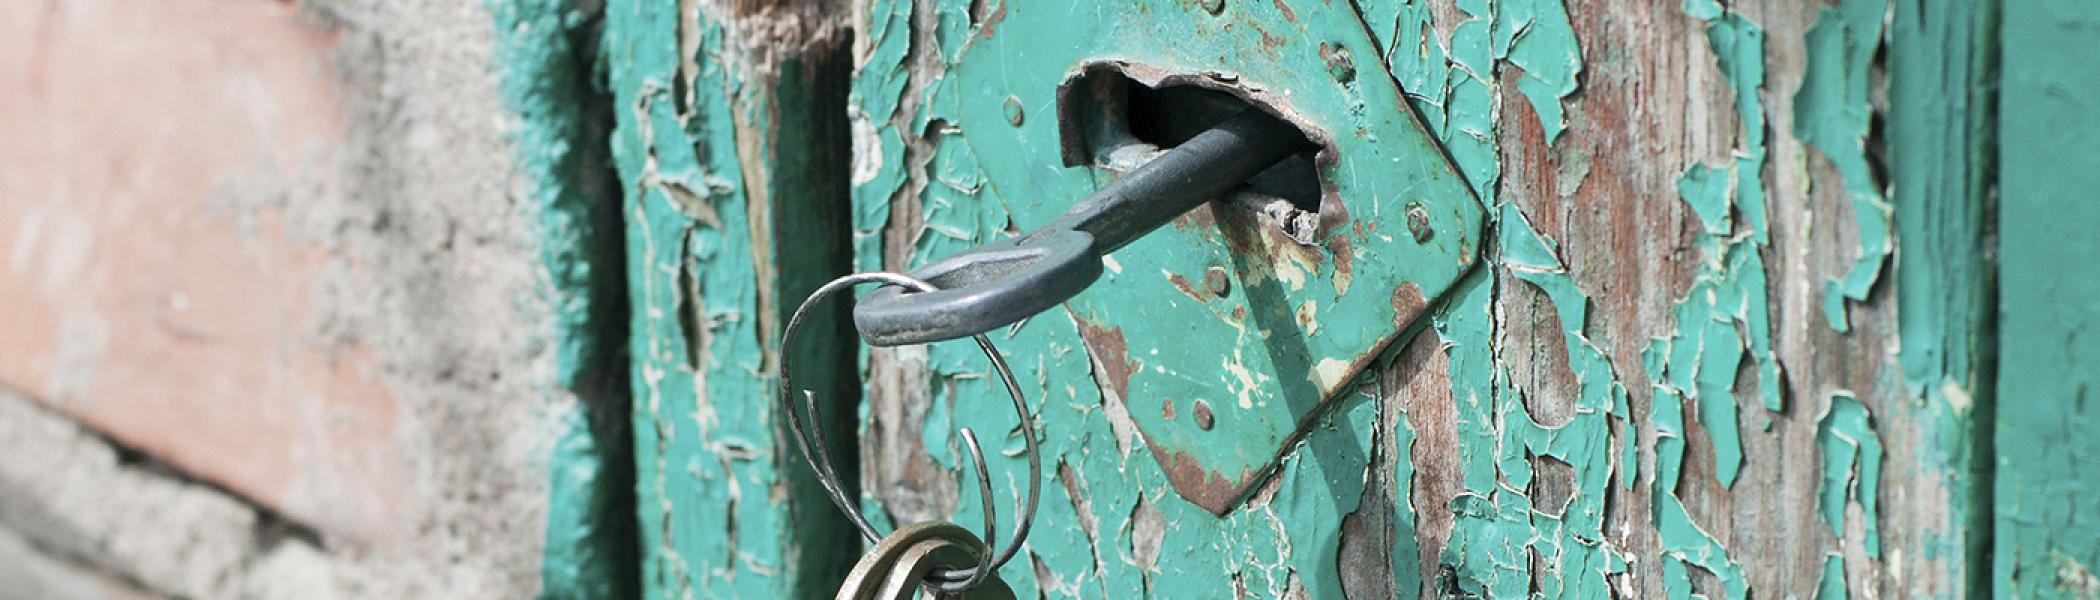 Old skeleton key in an old wooden door with chipped and peeling teal paint